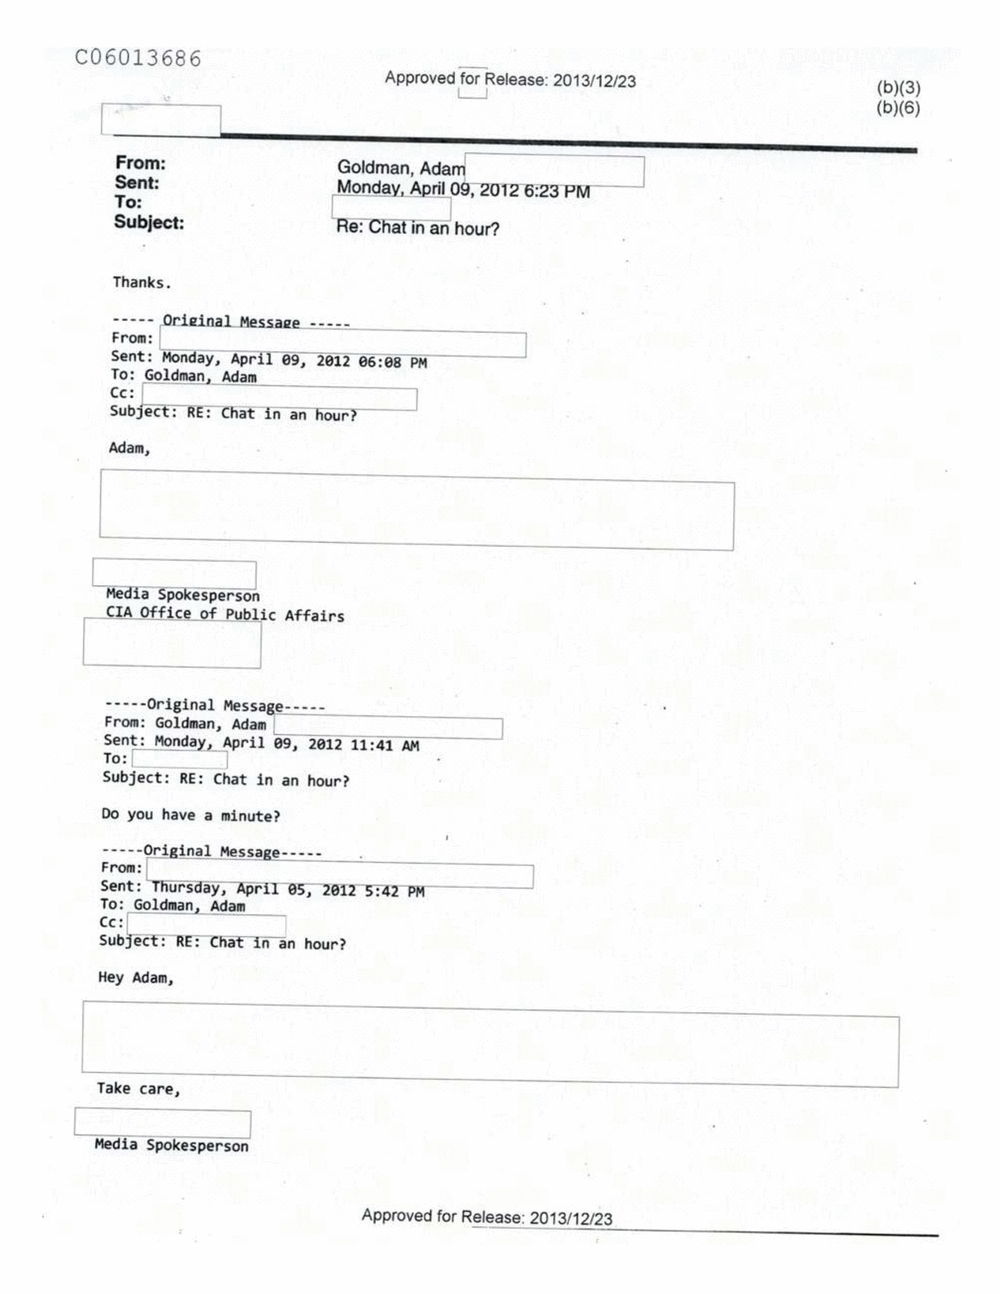 Page 541 from Email Correspondence Between Reporters and CIA Flacks